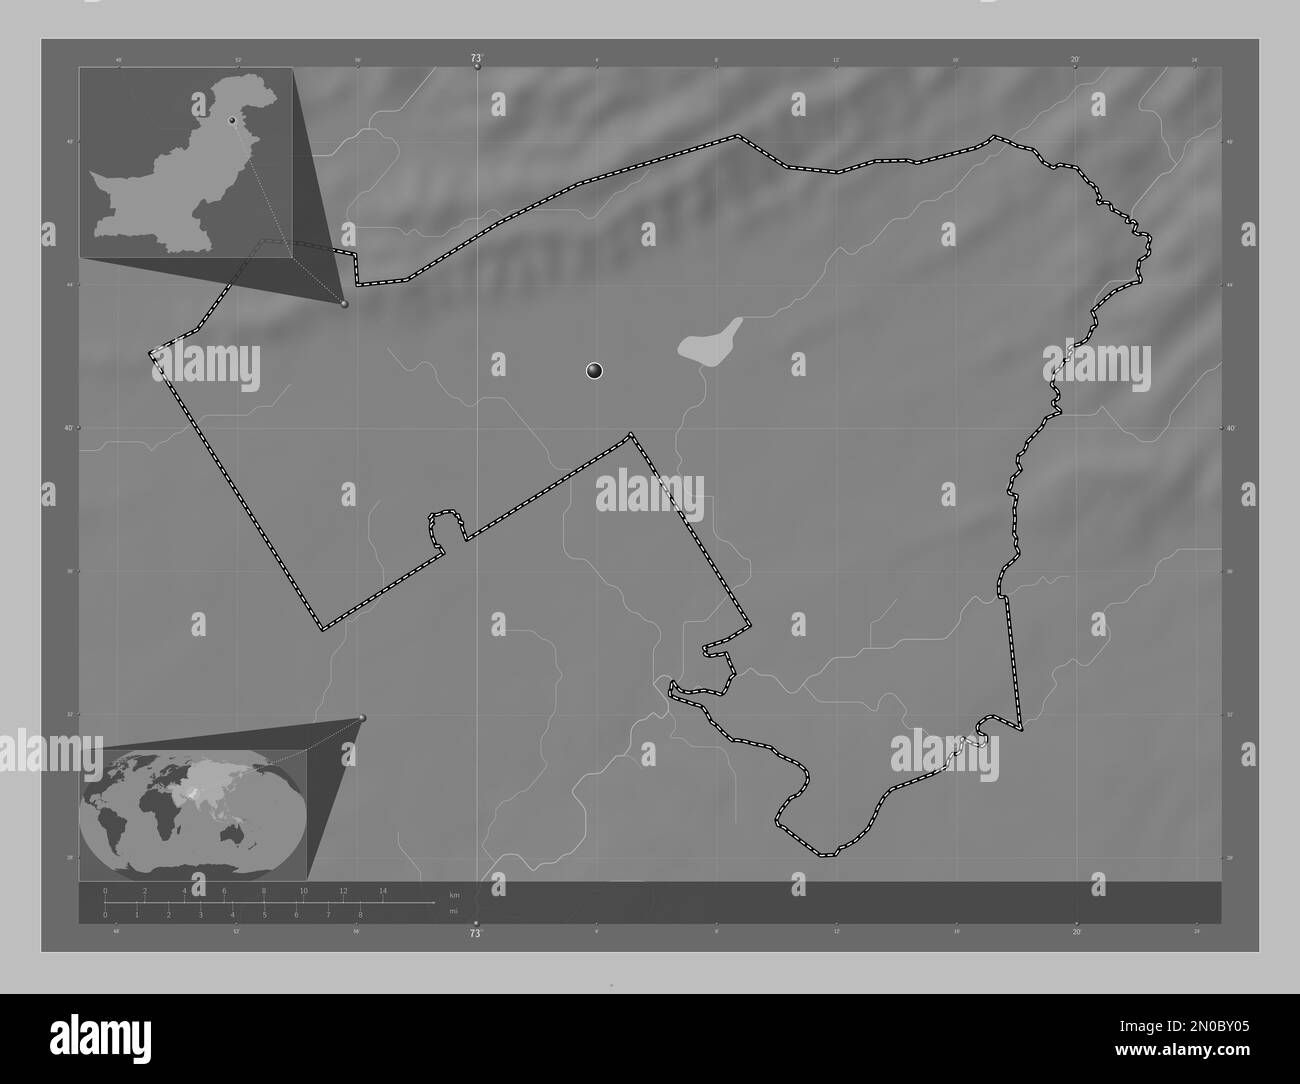 Islamabad Capital Territory, capital territory of Pakistan. Grayscale elevation map with lakes and rivers. Corner auxiliary location maps Stock Photo